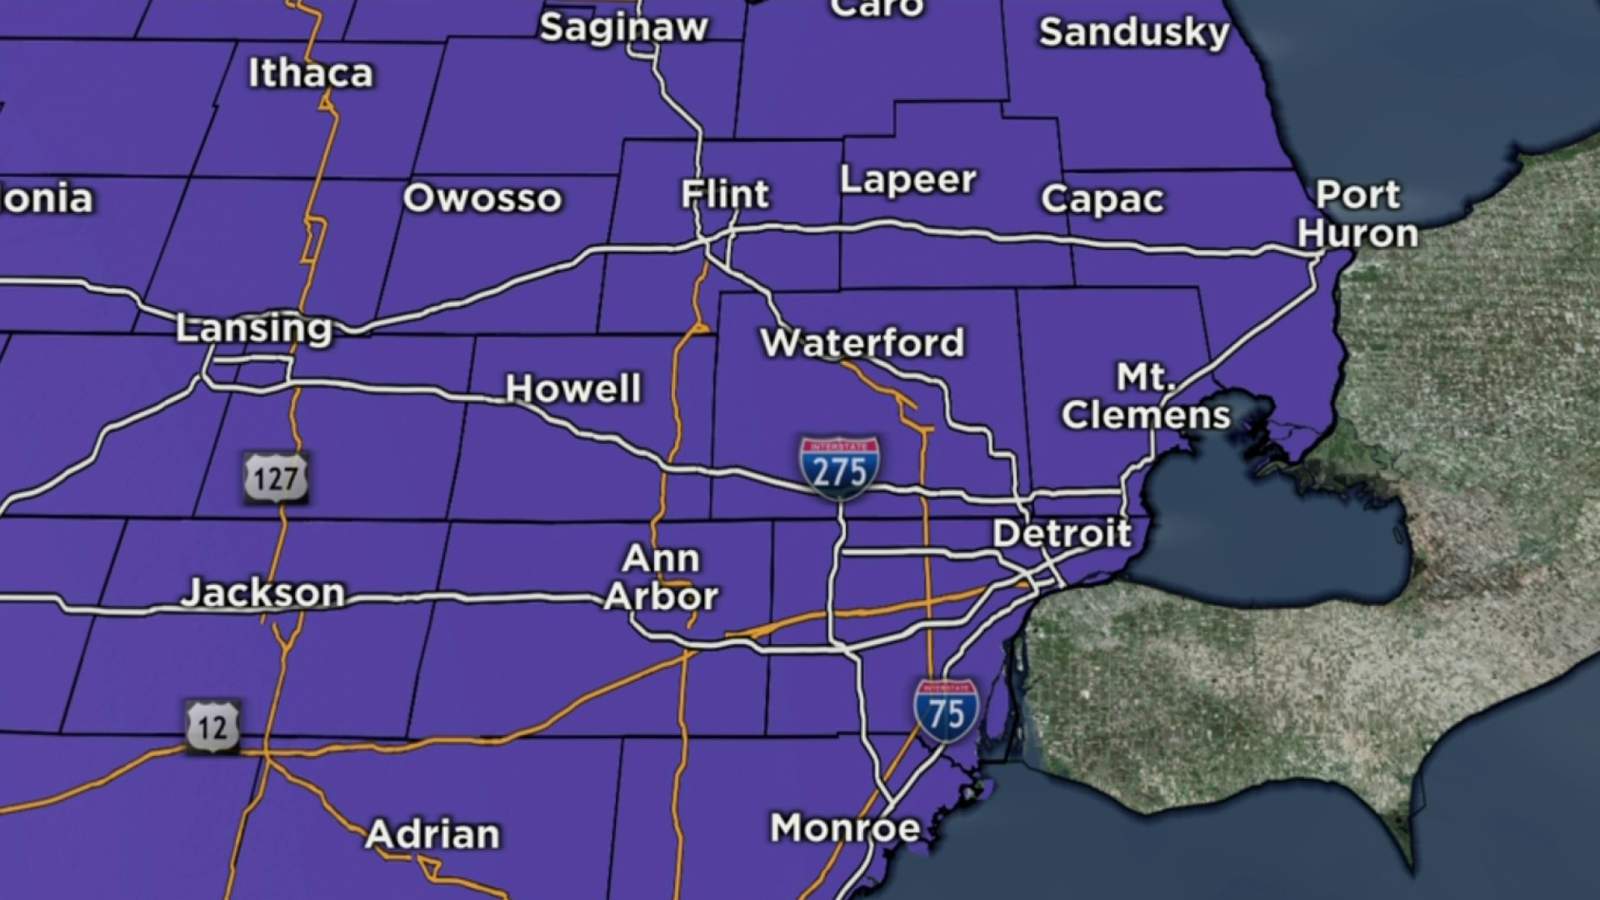 Winter weather advisory in Metro Detroit today with ice as biggest concern: What to know